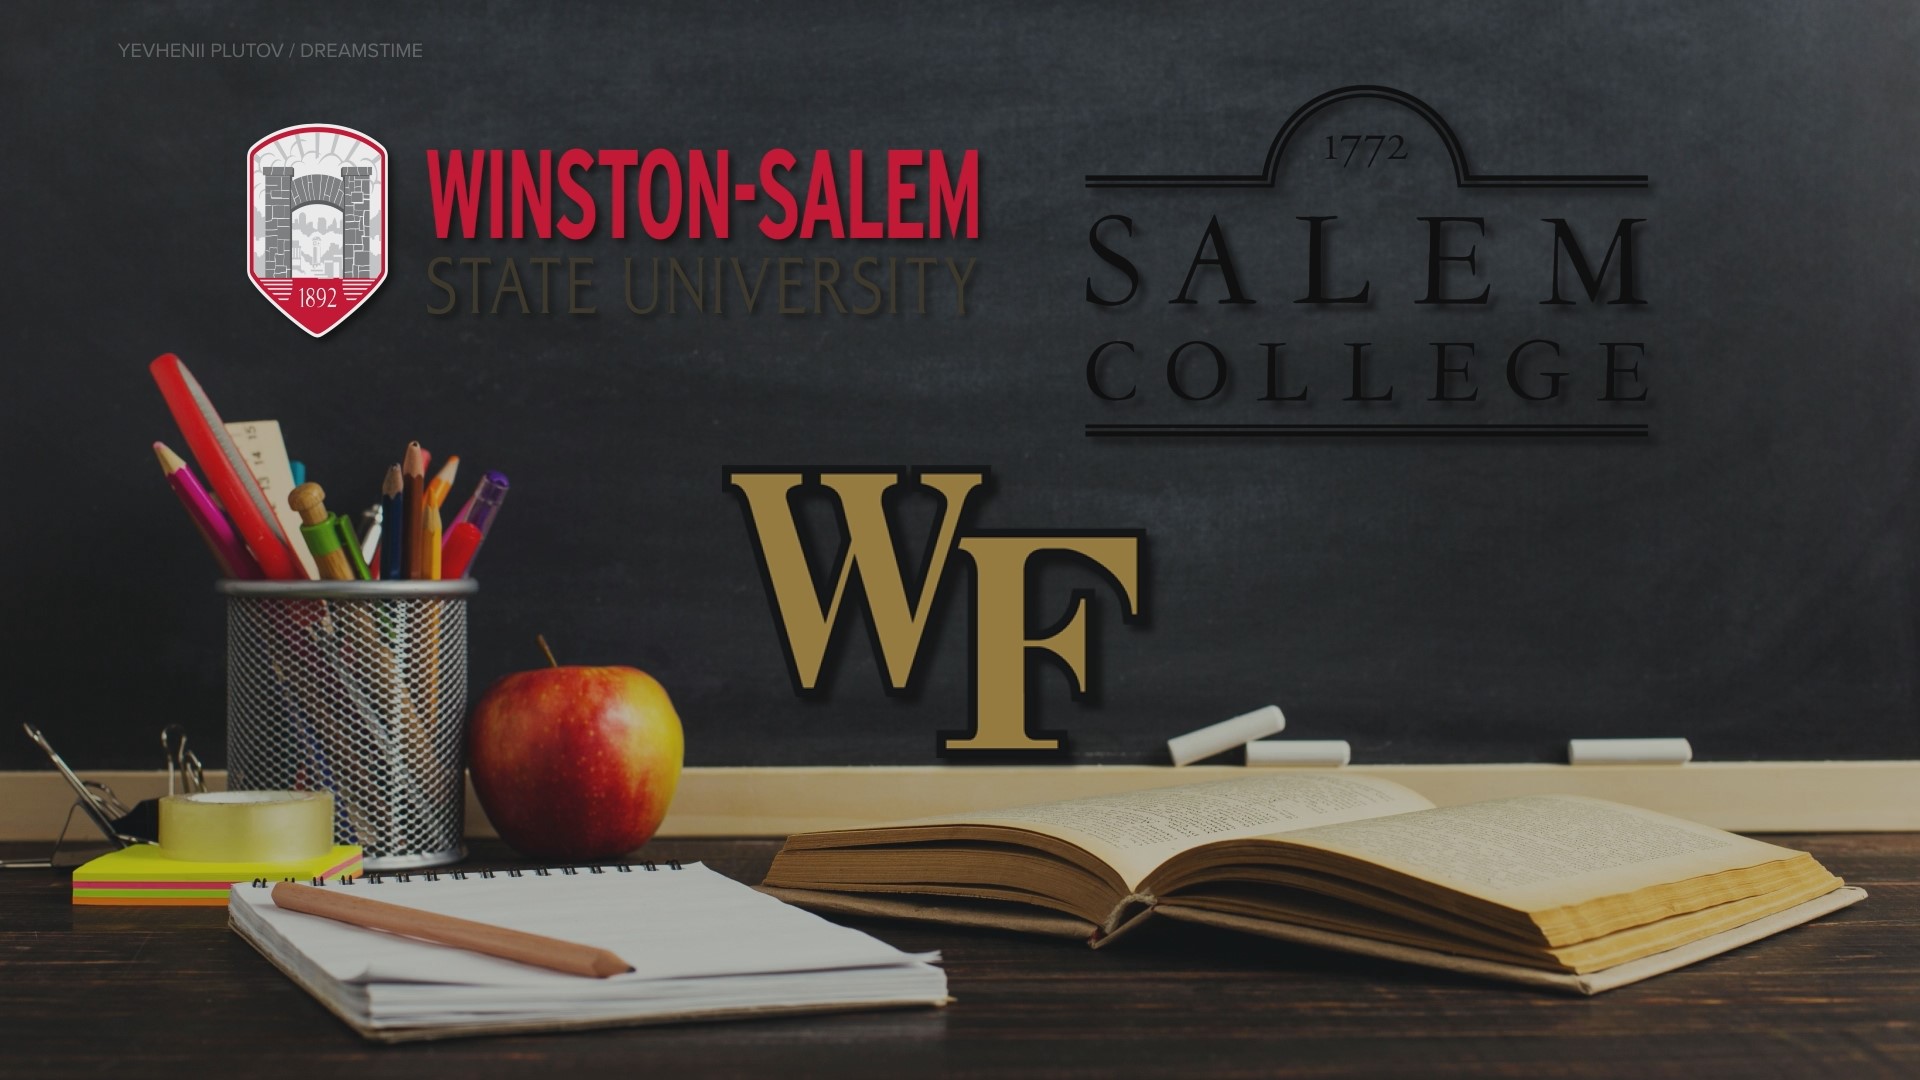 Several universities in the Winston-Salem/Forsyth County area have teamed up for a new program to recruit and retain teachers.